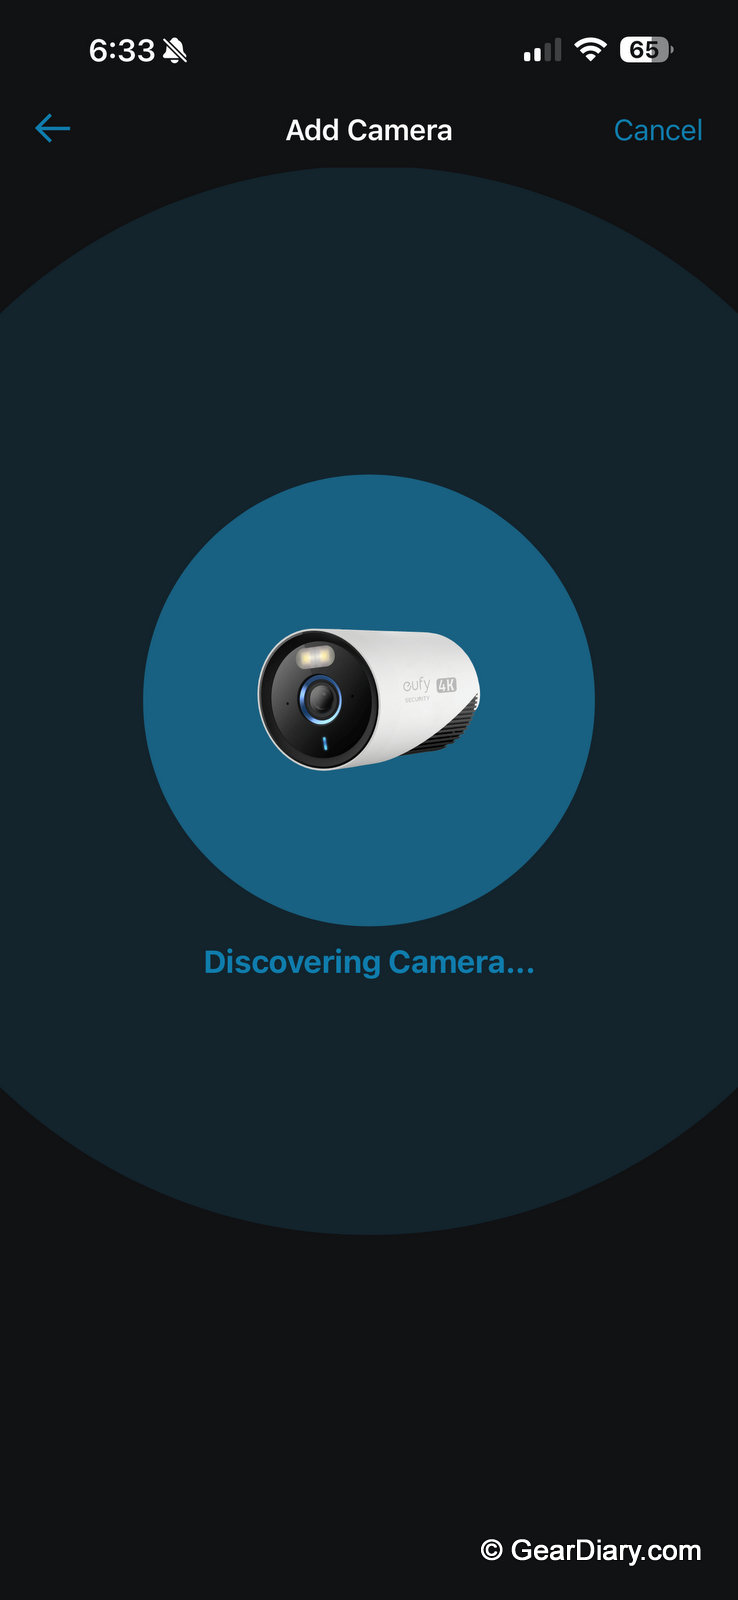 EufyCam E330 (Professional) 4-Cam Kit Review: A Cost-Effective Way to Get Full Property Security Coverage